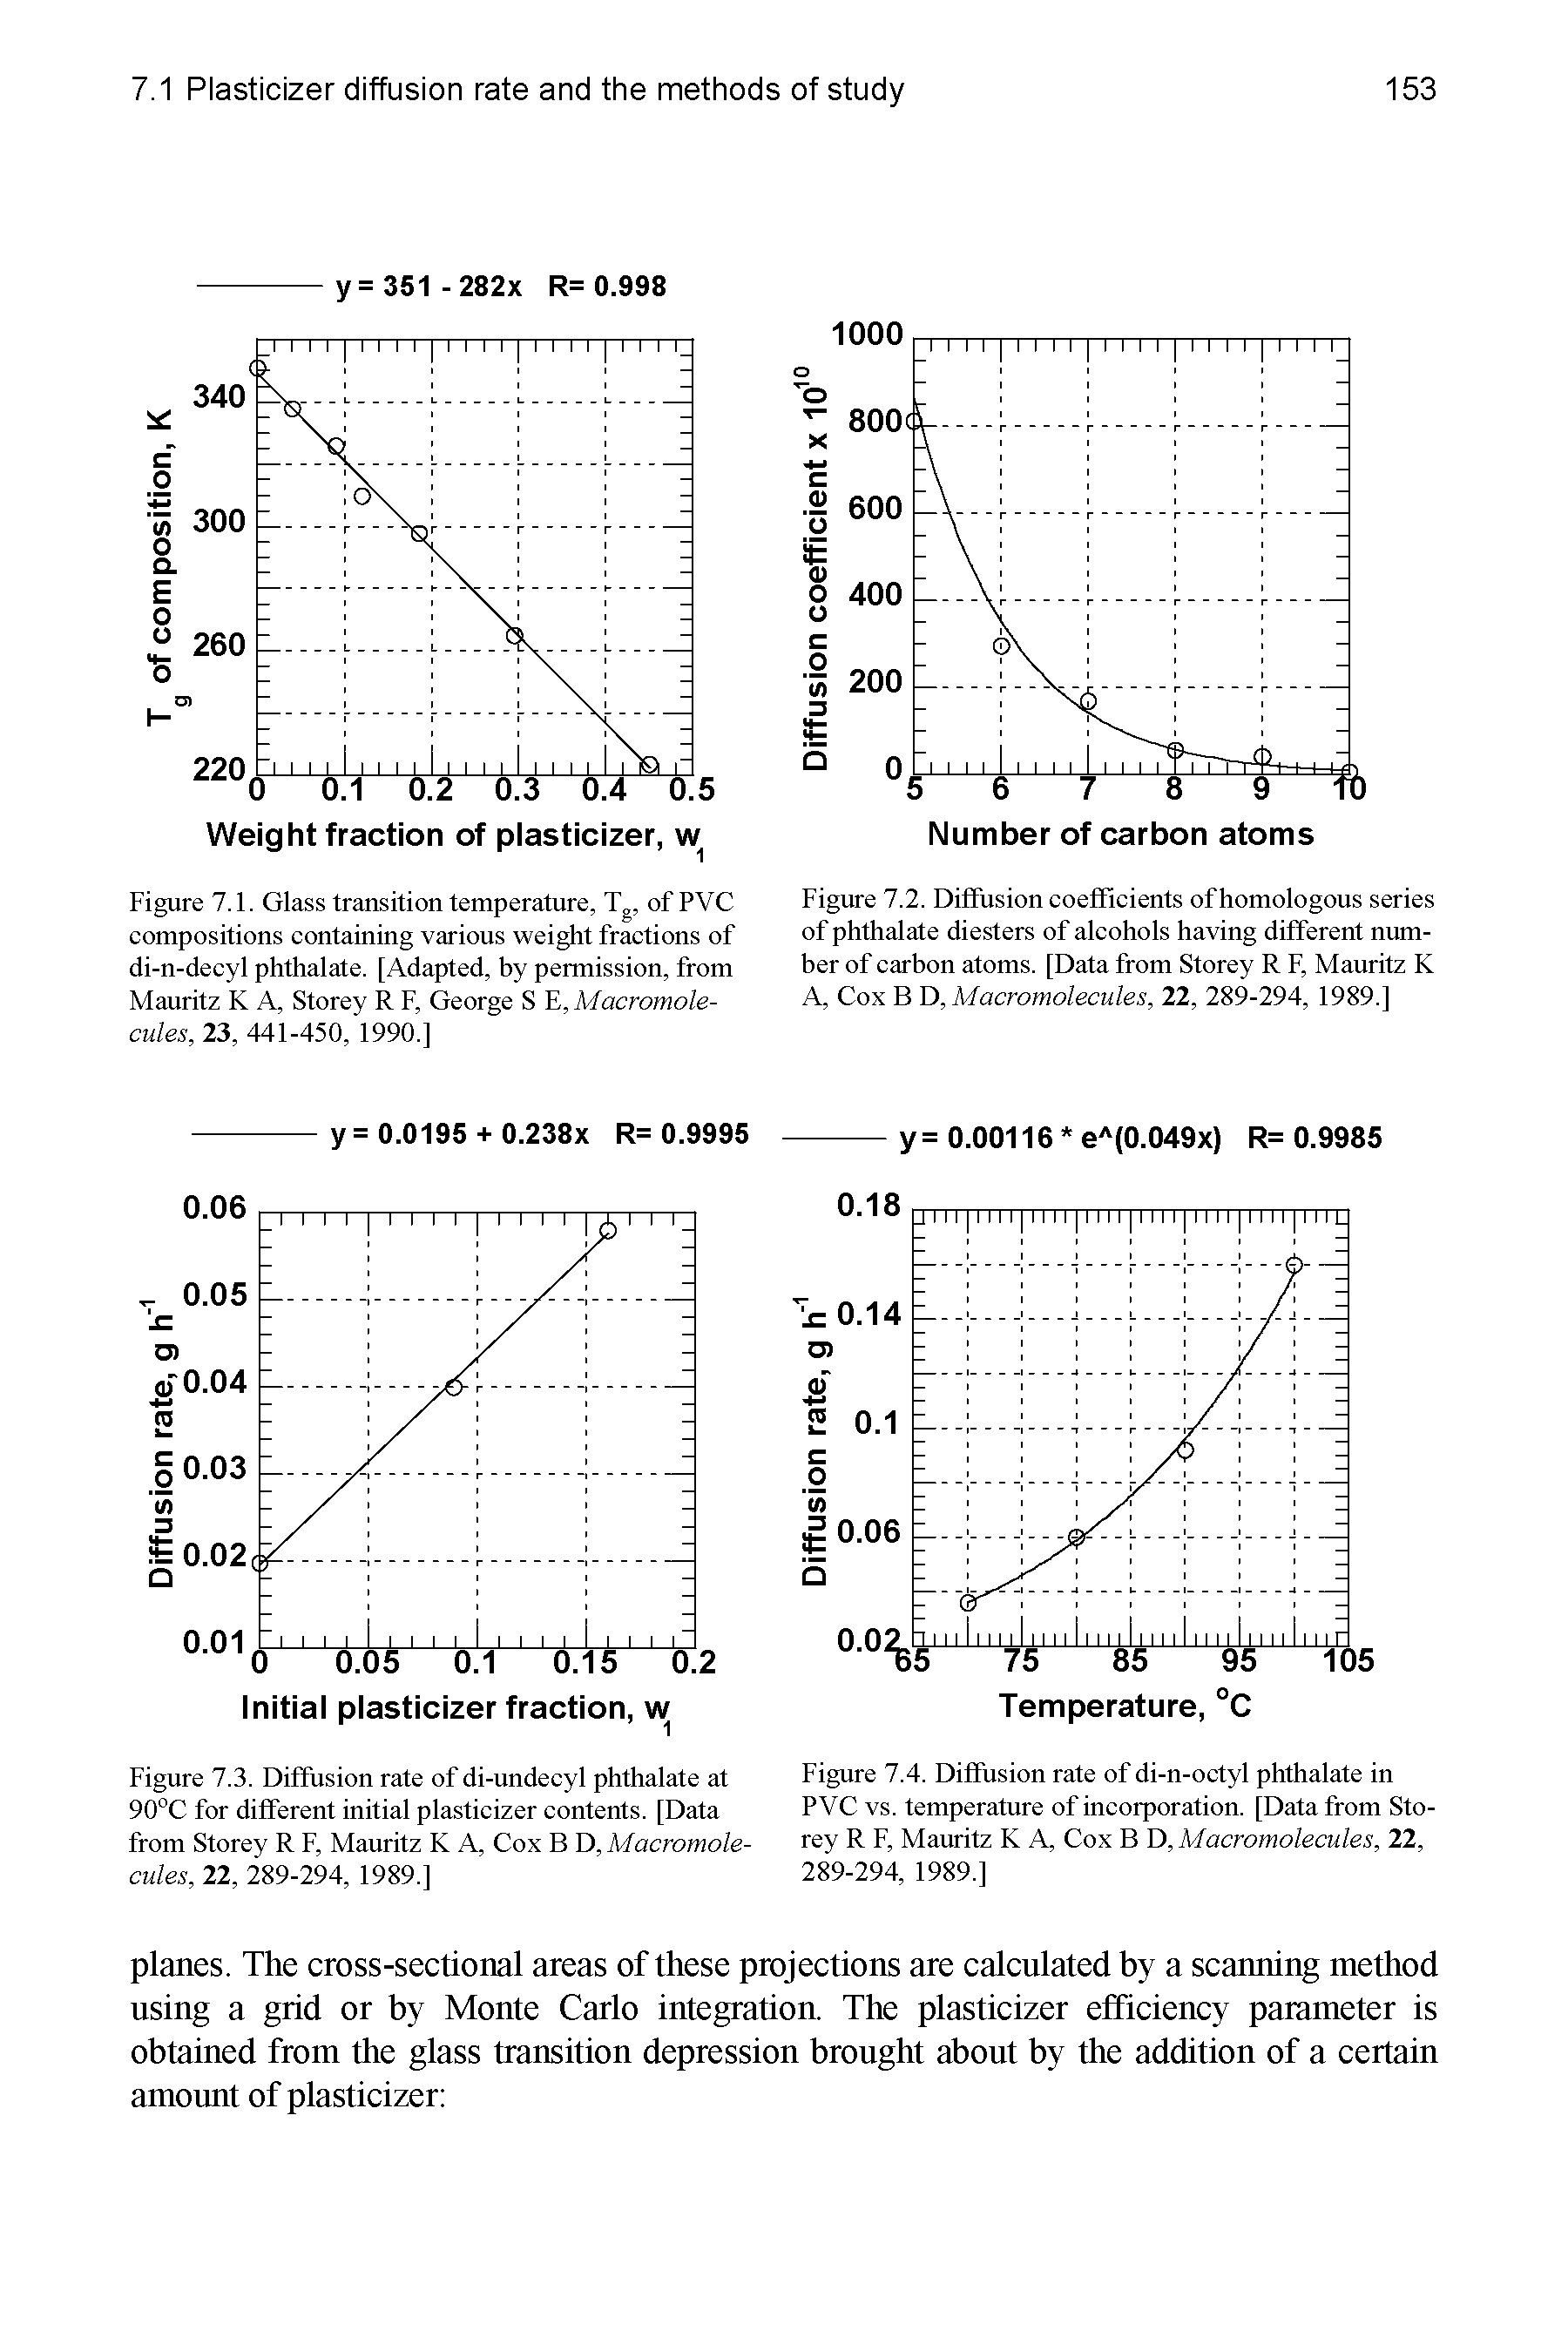 Figure 7.3. Diffusion rate of di-undecyl phthalate at 90°C for different initial plasticizer contents. [Data from Storey R F, Mauritz K A, Cox B D, Macromolecules, 22, 289-294, 1989.1...